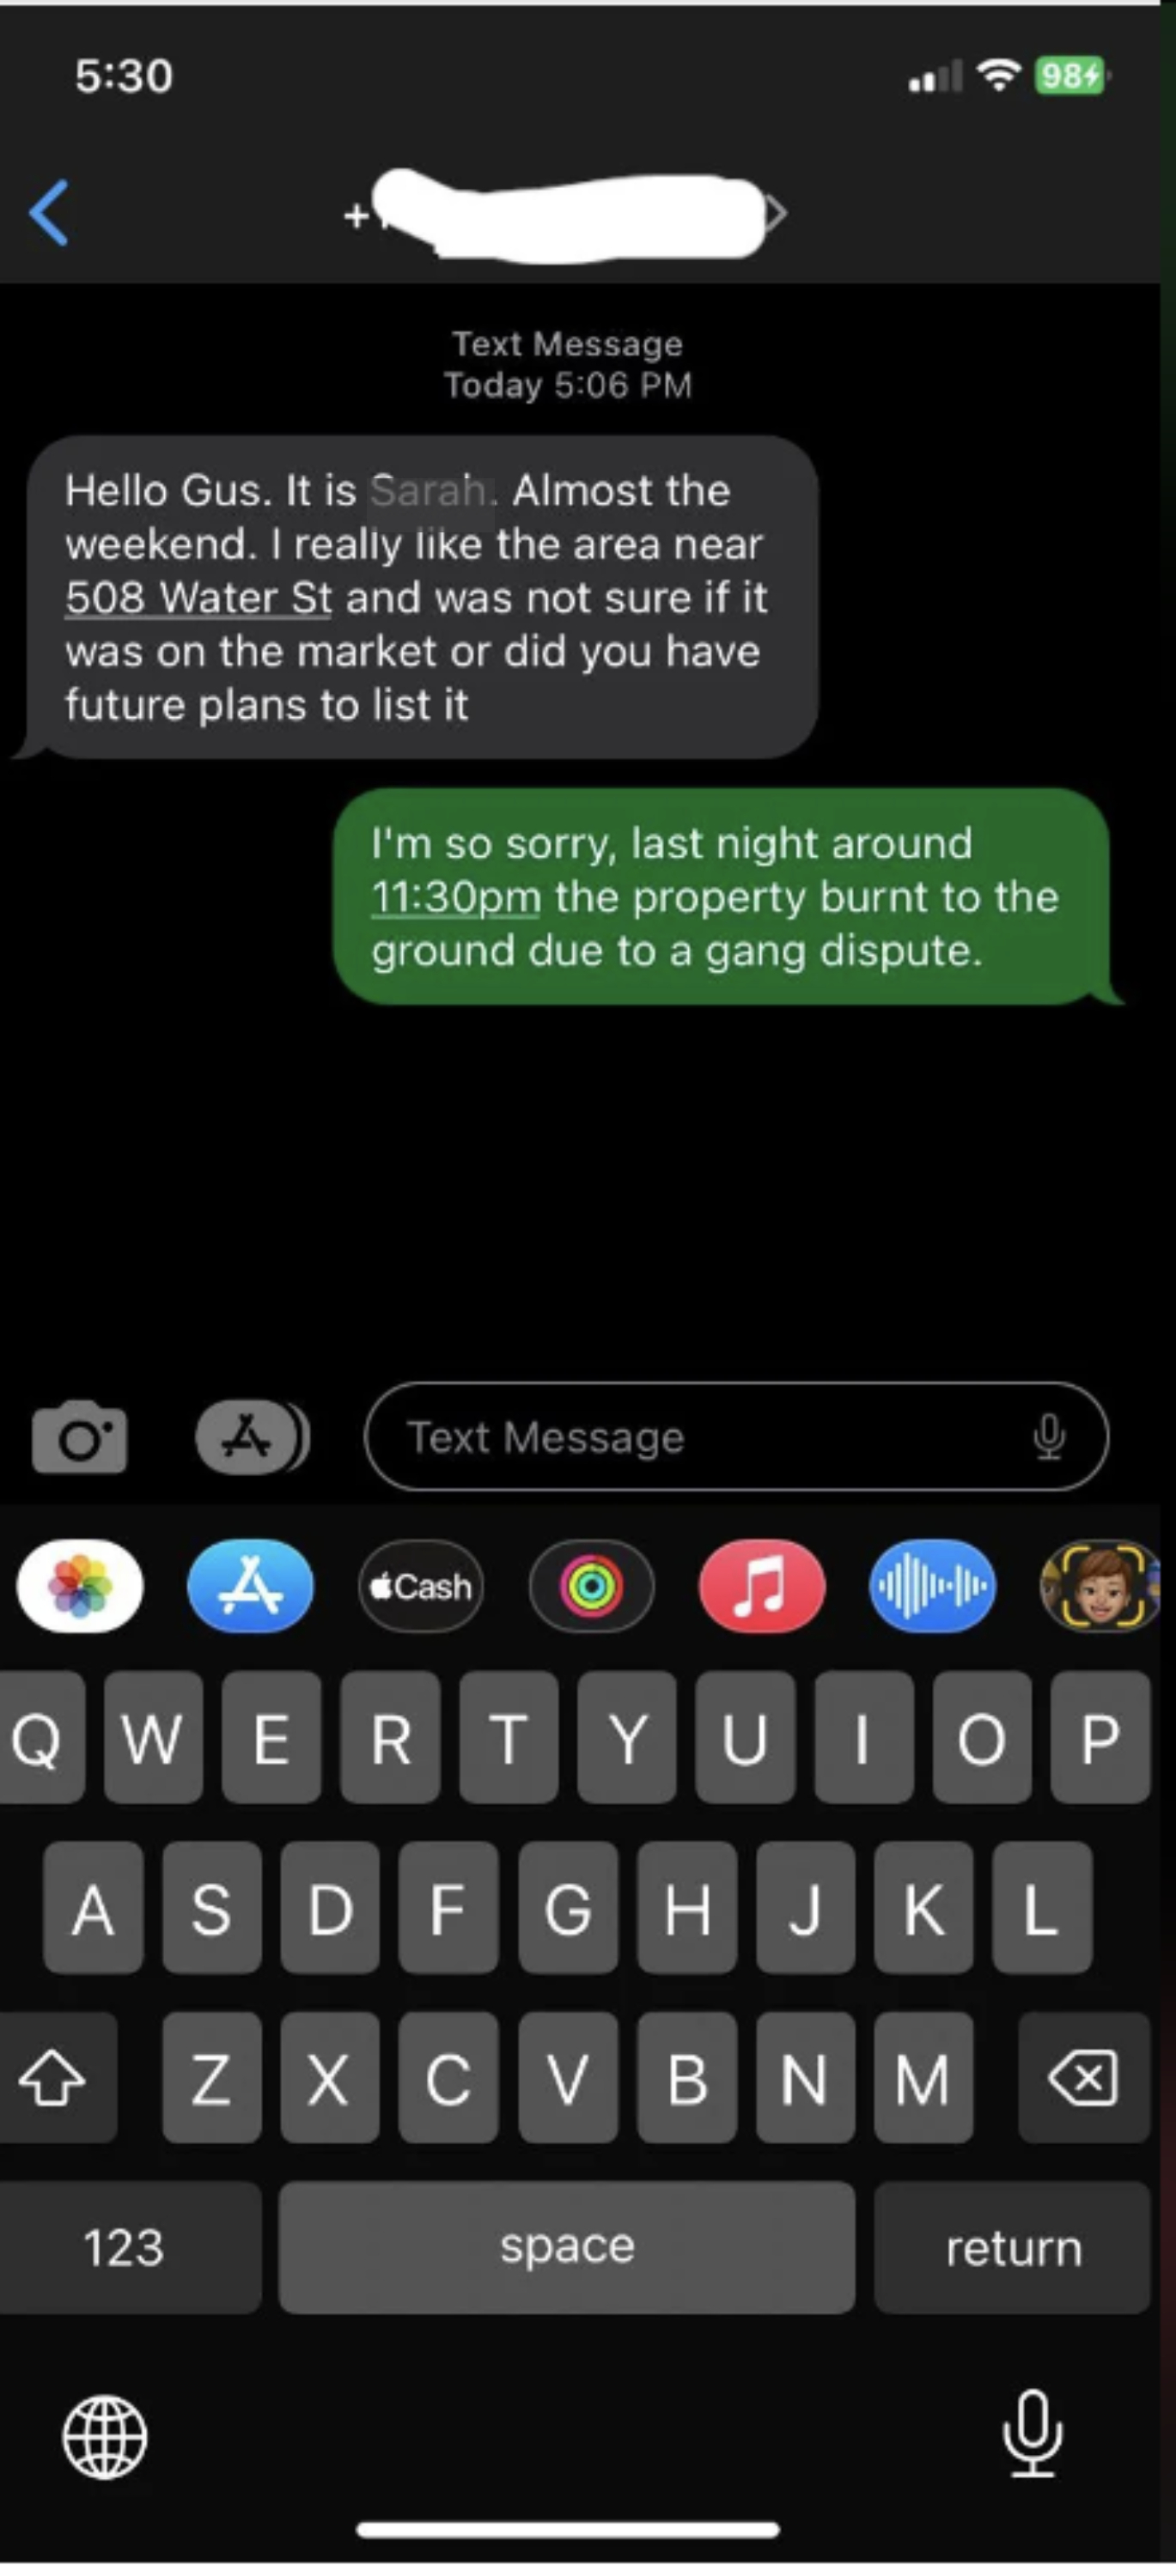 person tries to reach out to a realtor but the person responds the property burned down